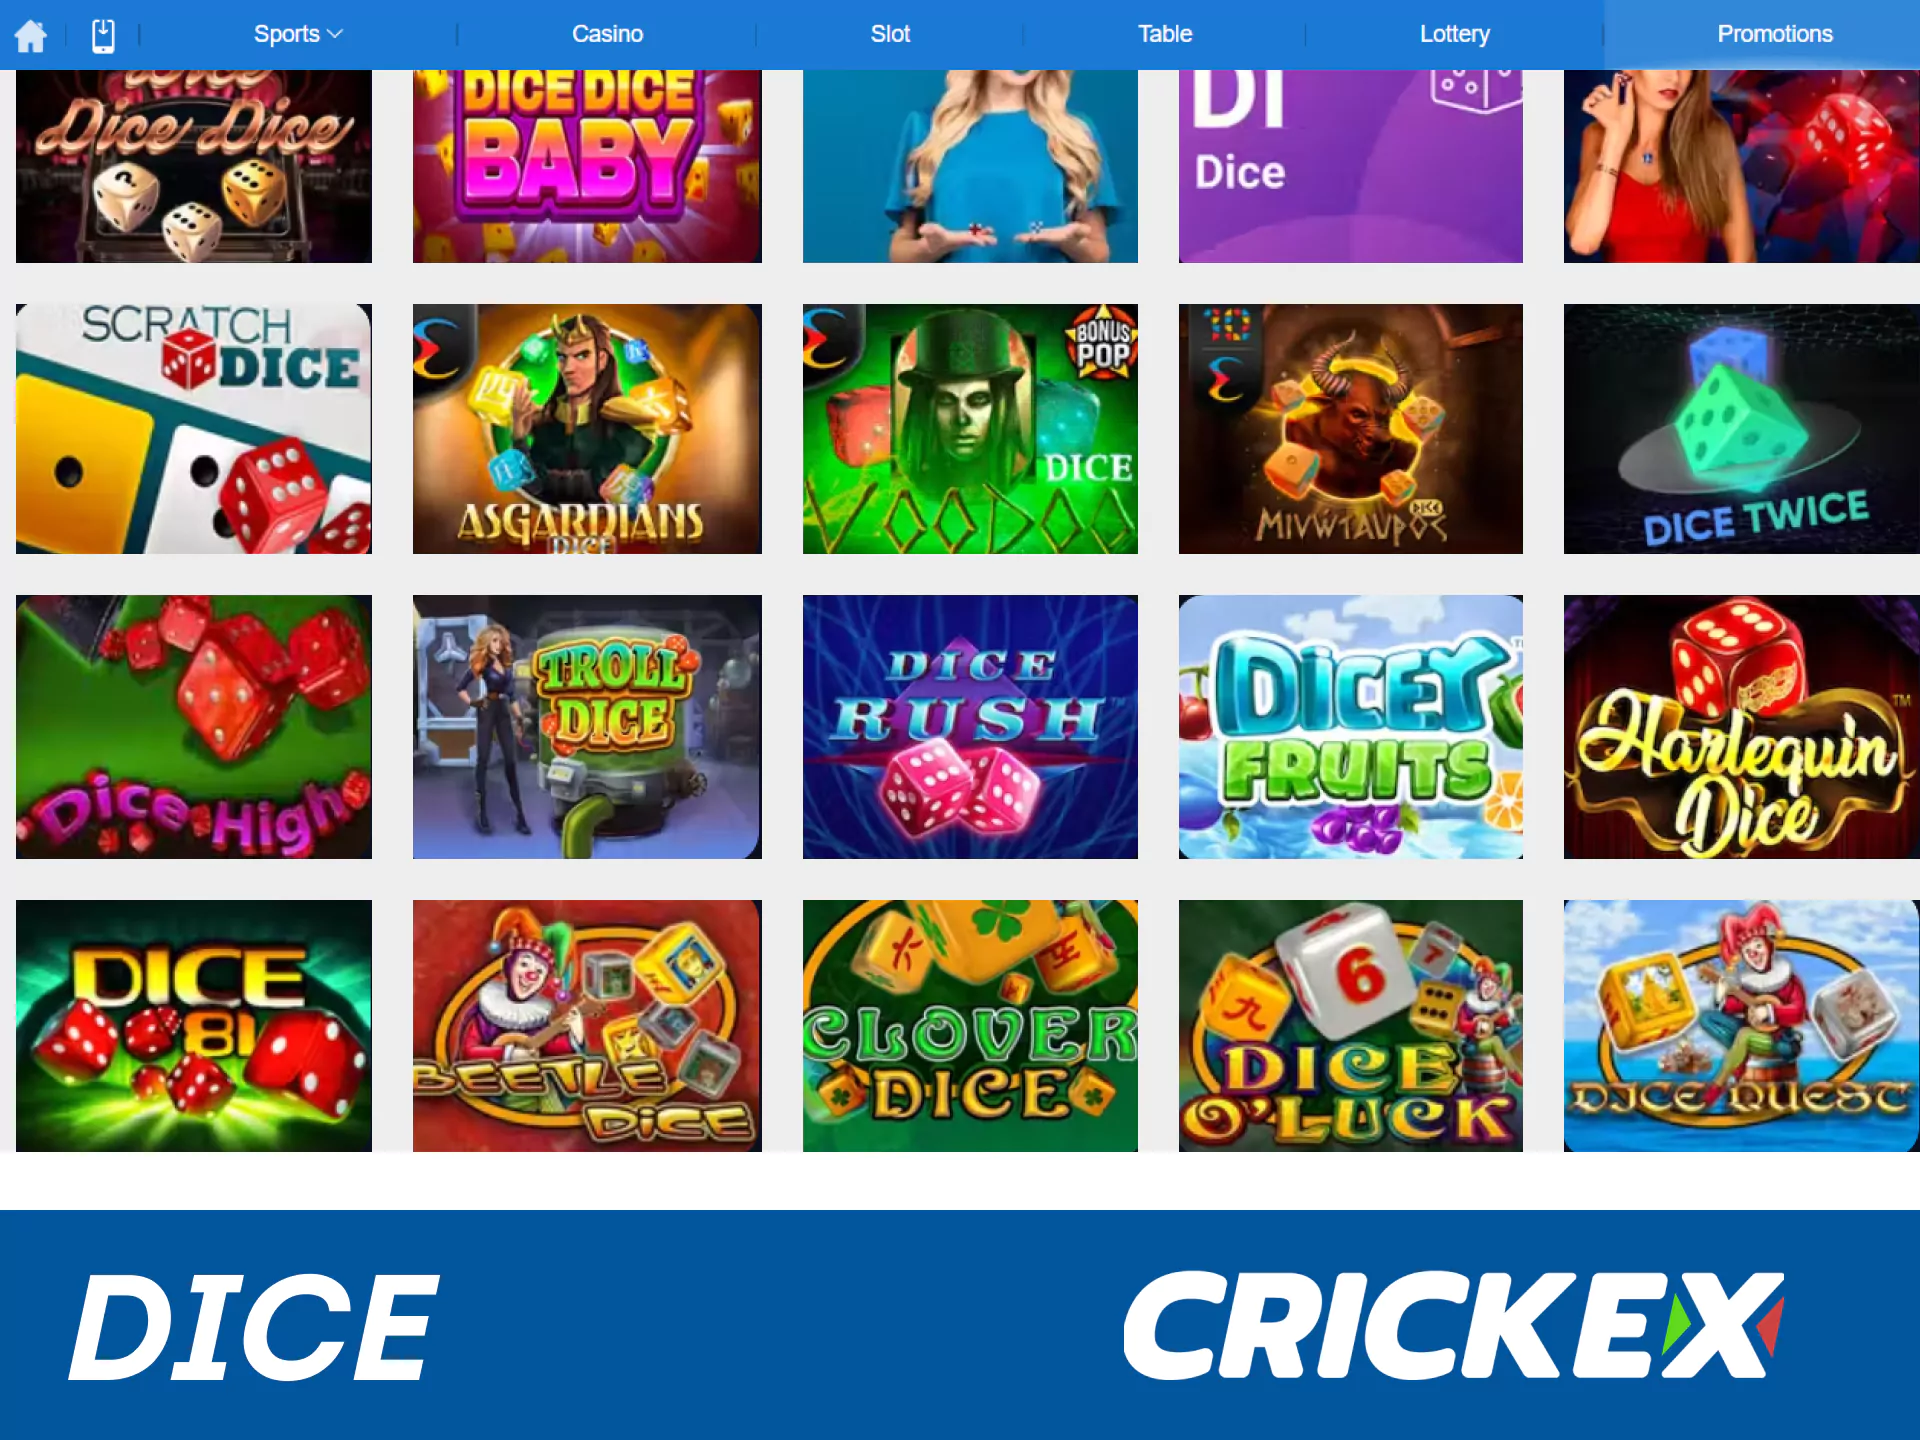 For casino games, choose dice from Crickex.